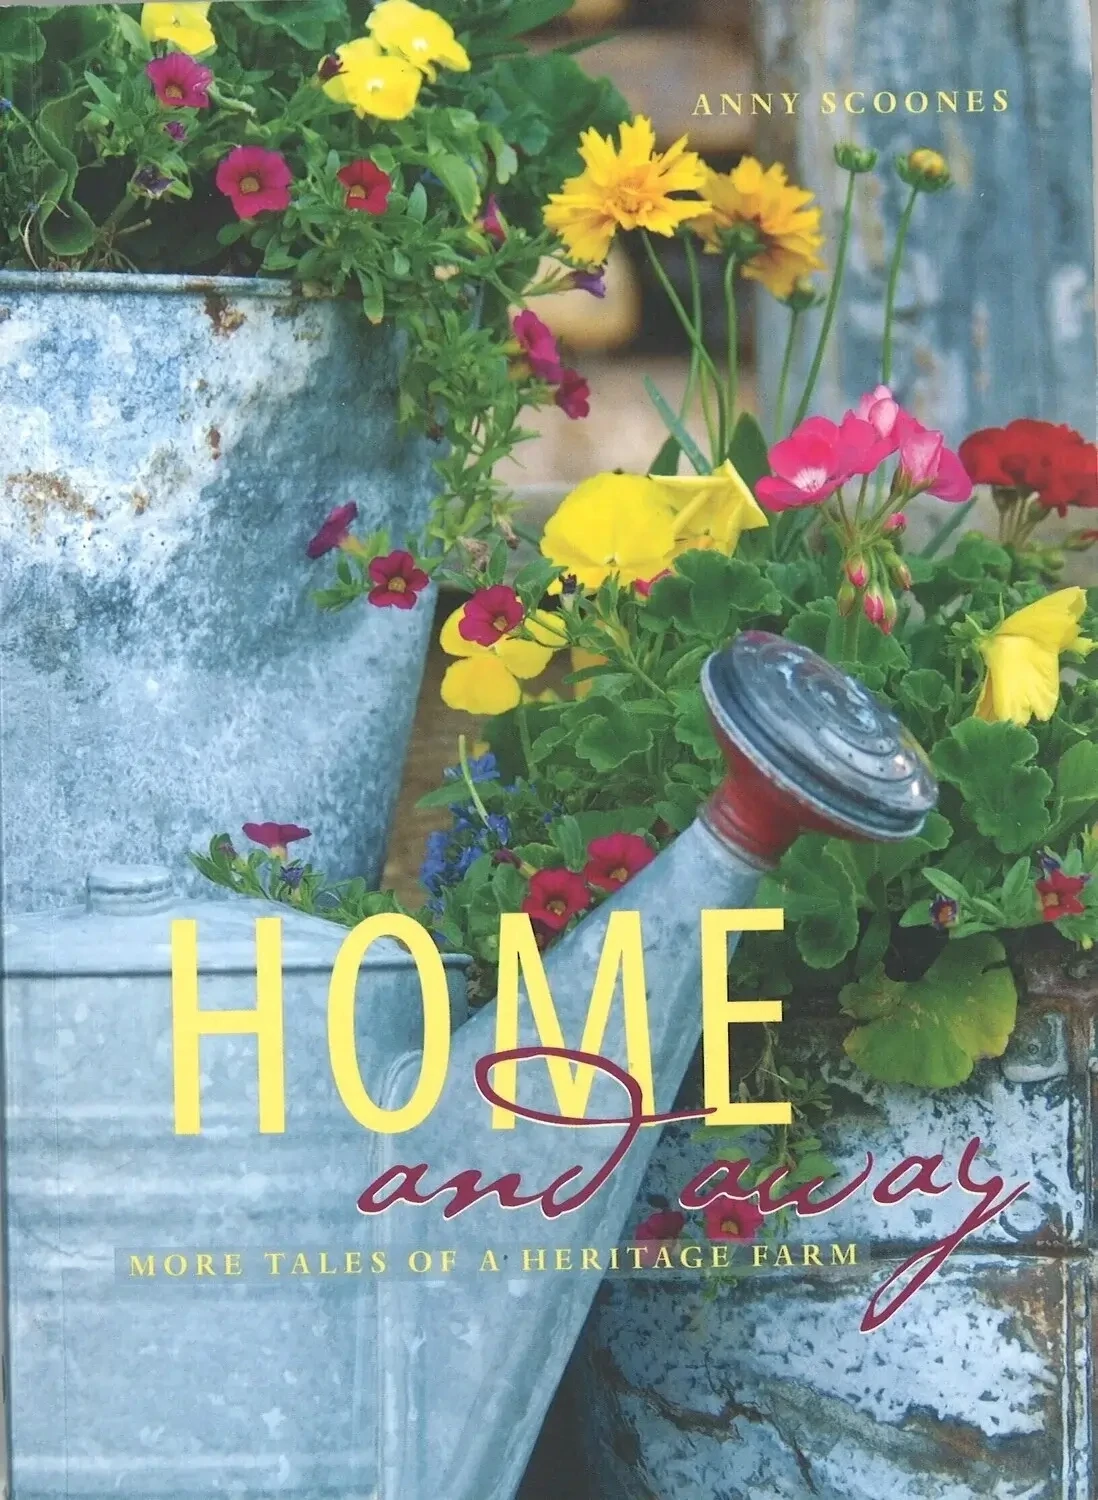 Home and Away : More Tales of a Heritage Farm by Anny Scoones